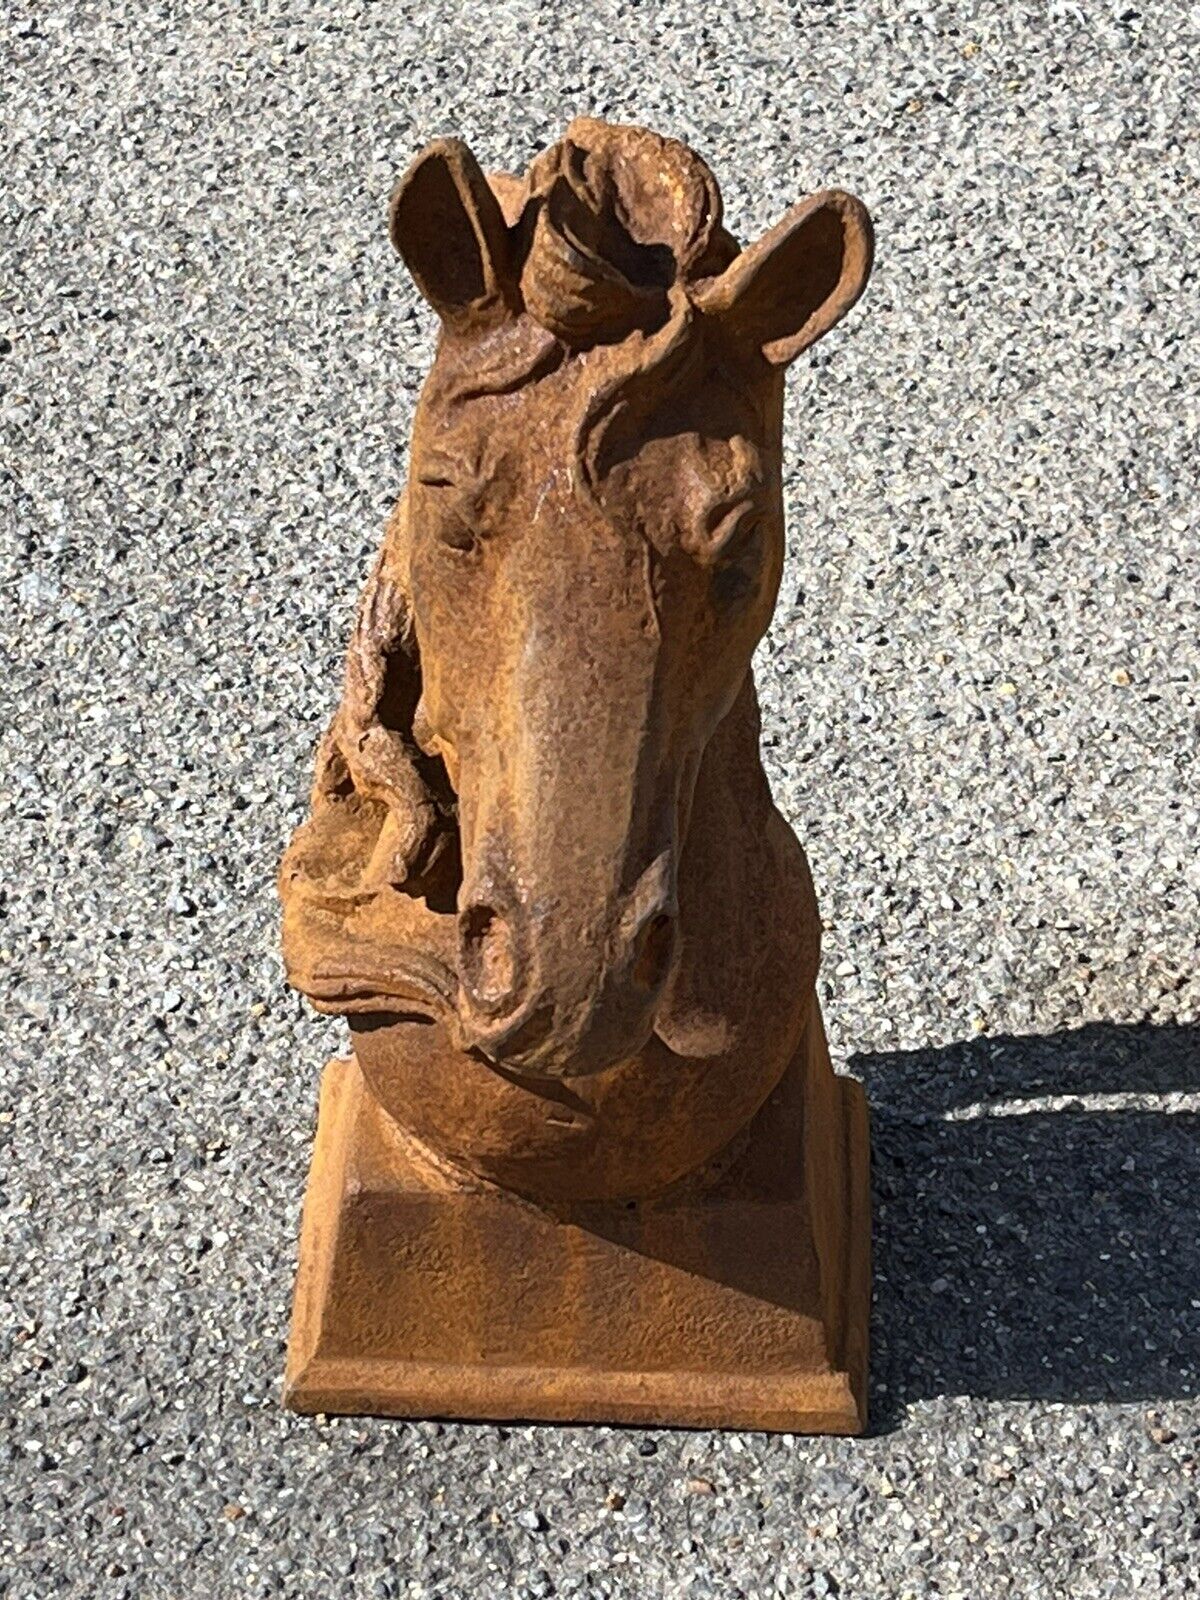 Horse Head Statue, Cast Iron, Large In Size. We Ship Worldwide.